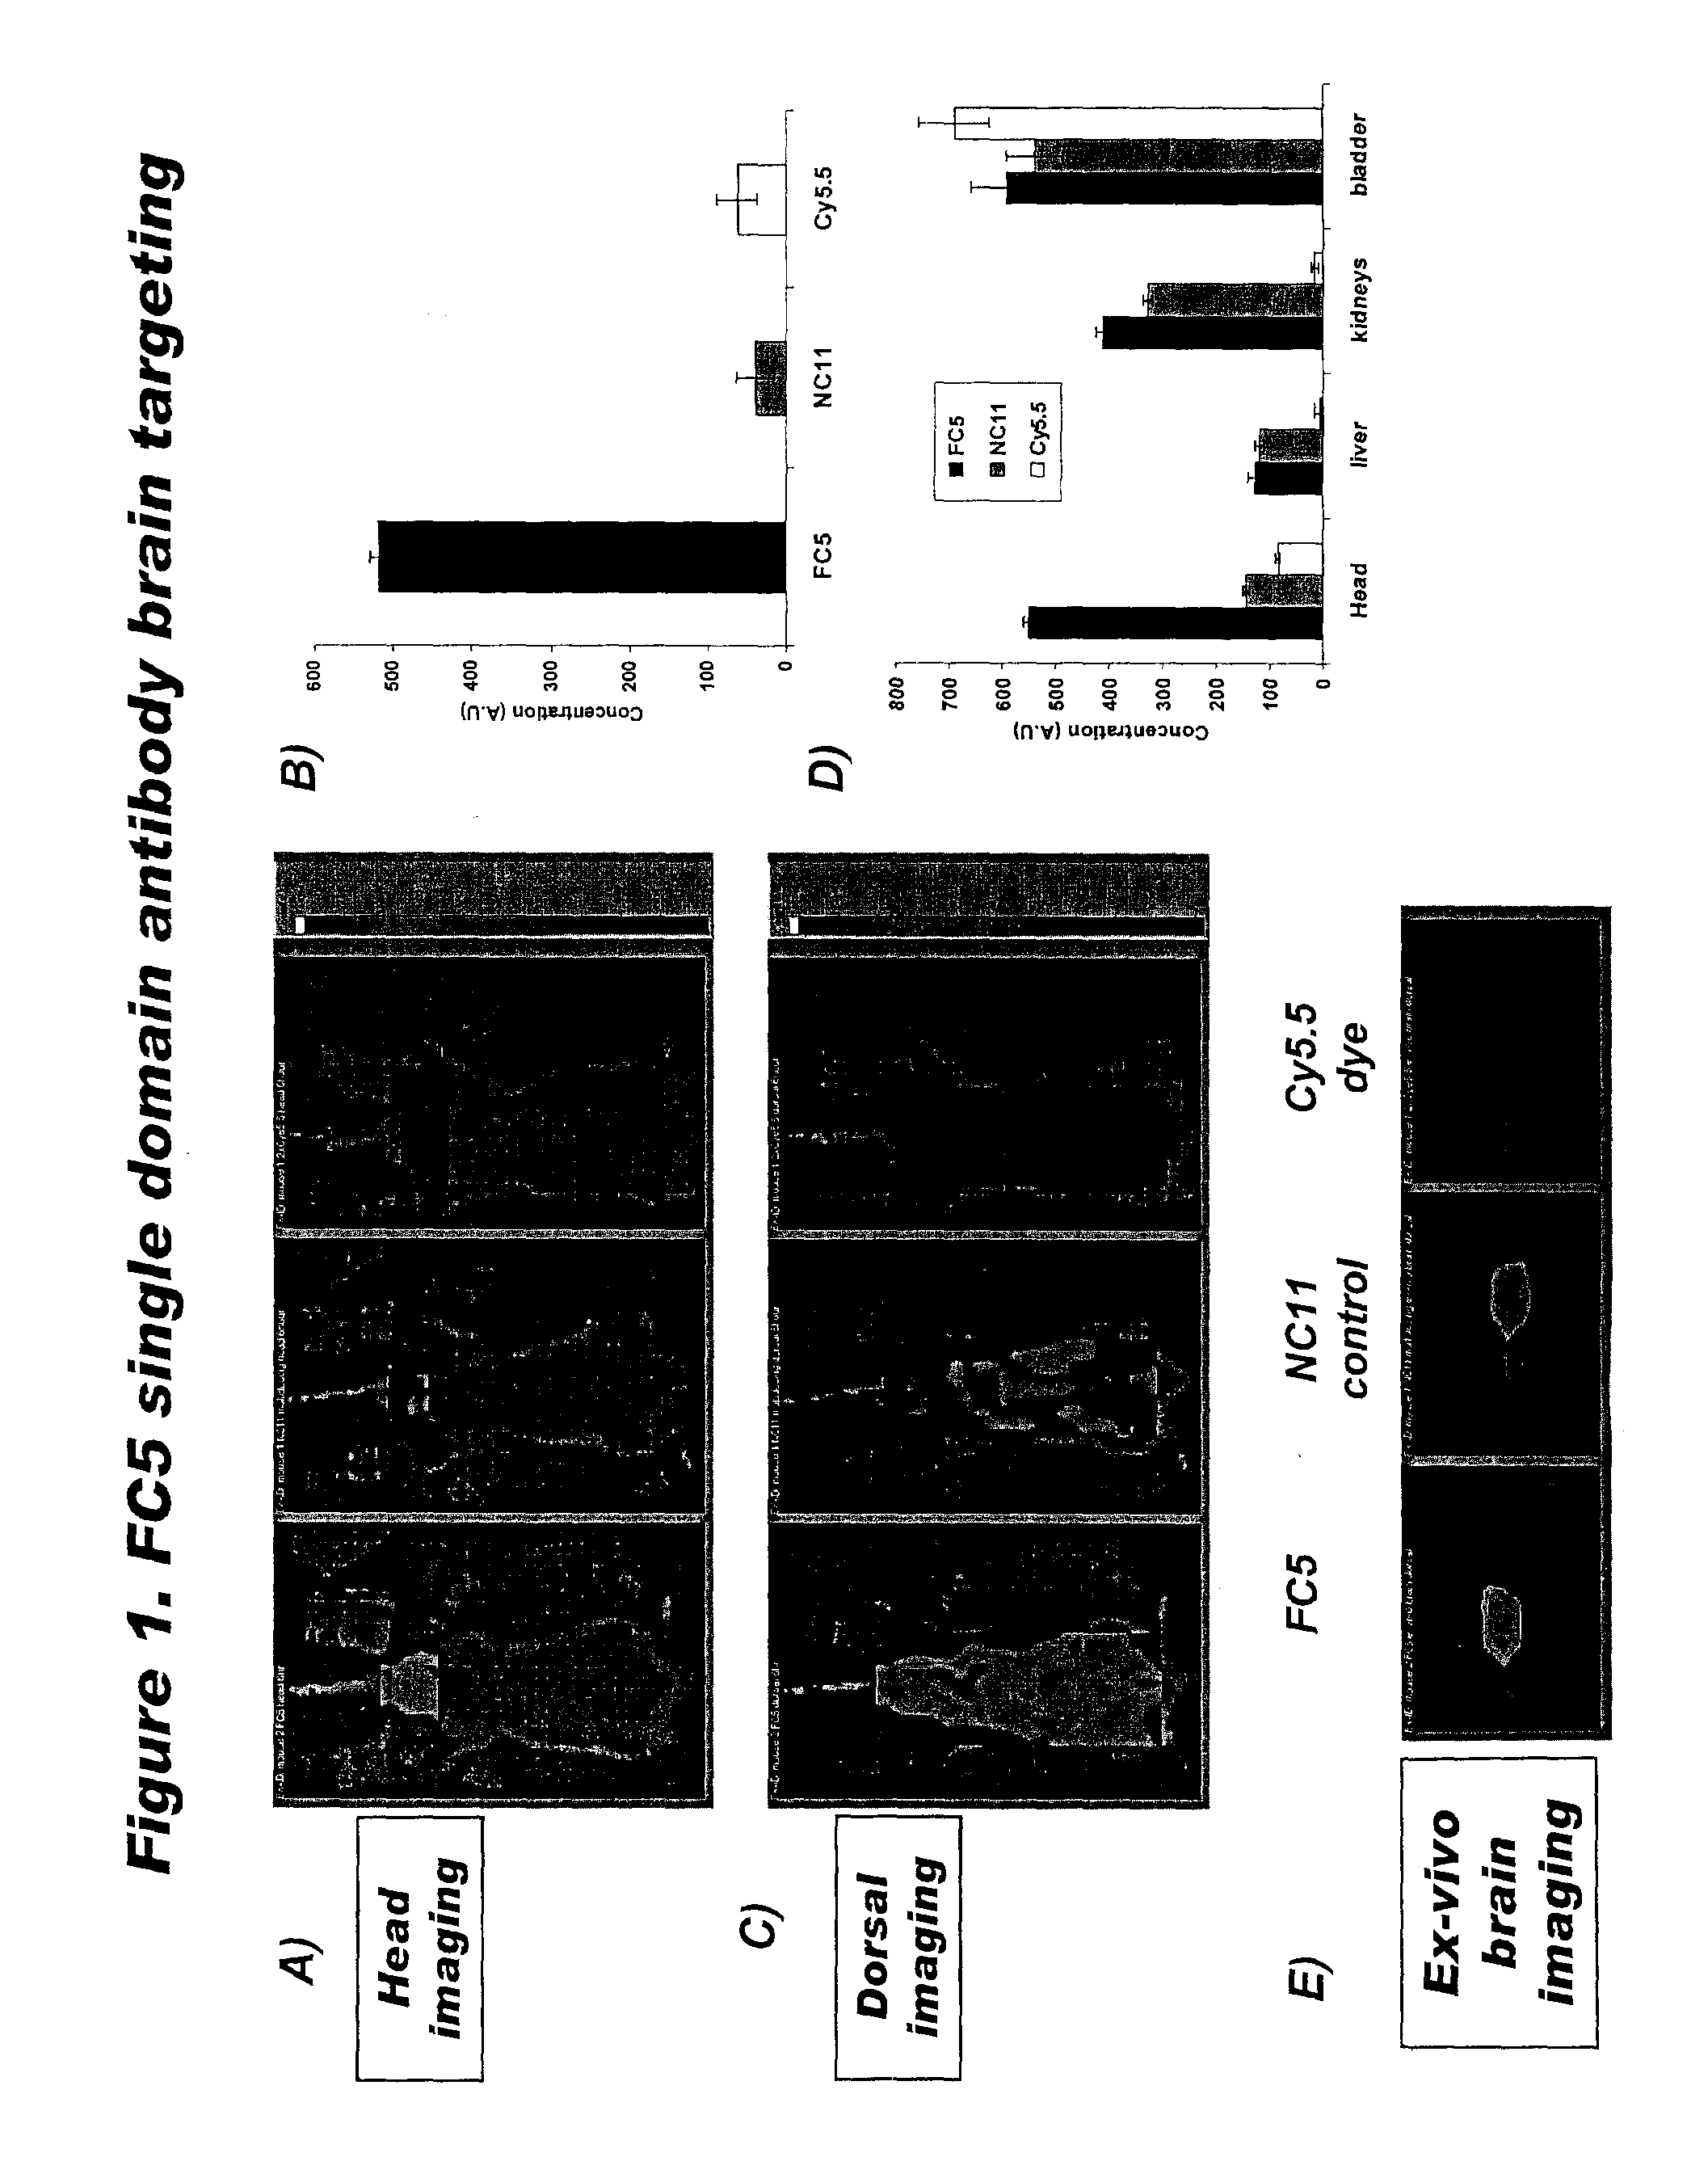 Blood-brain barrier epitopes and uses thereof